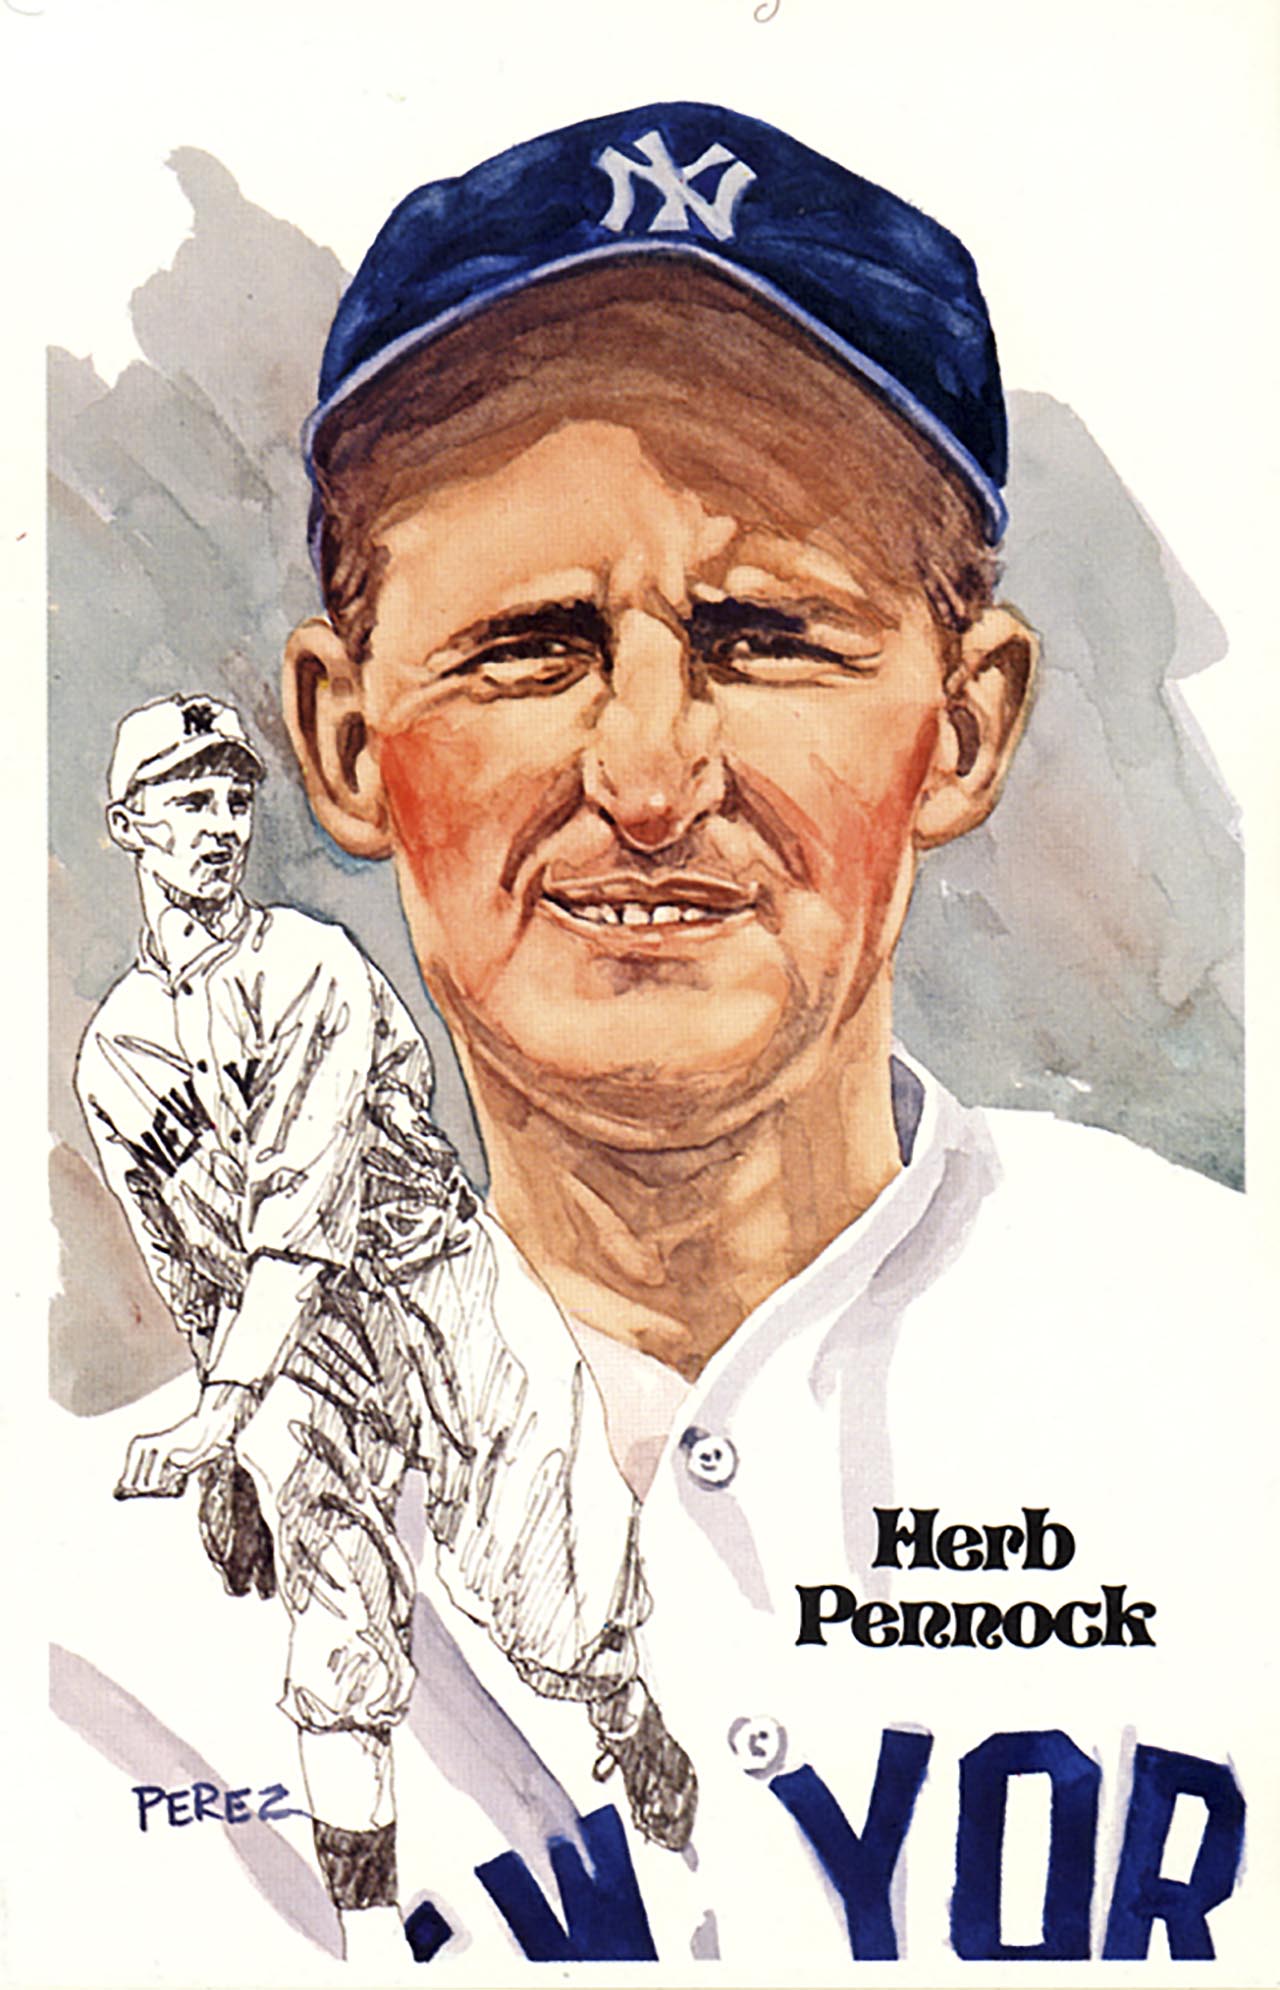 Hall of Fame Art Post Cards Series 2 : Dick Perez